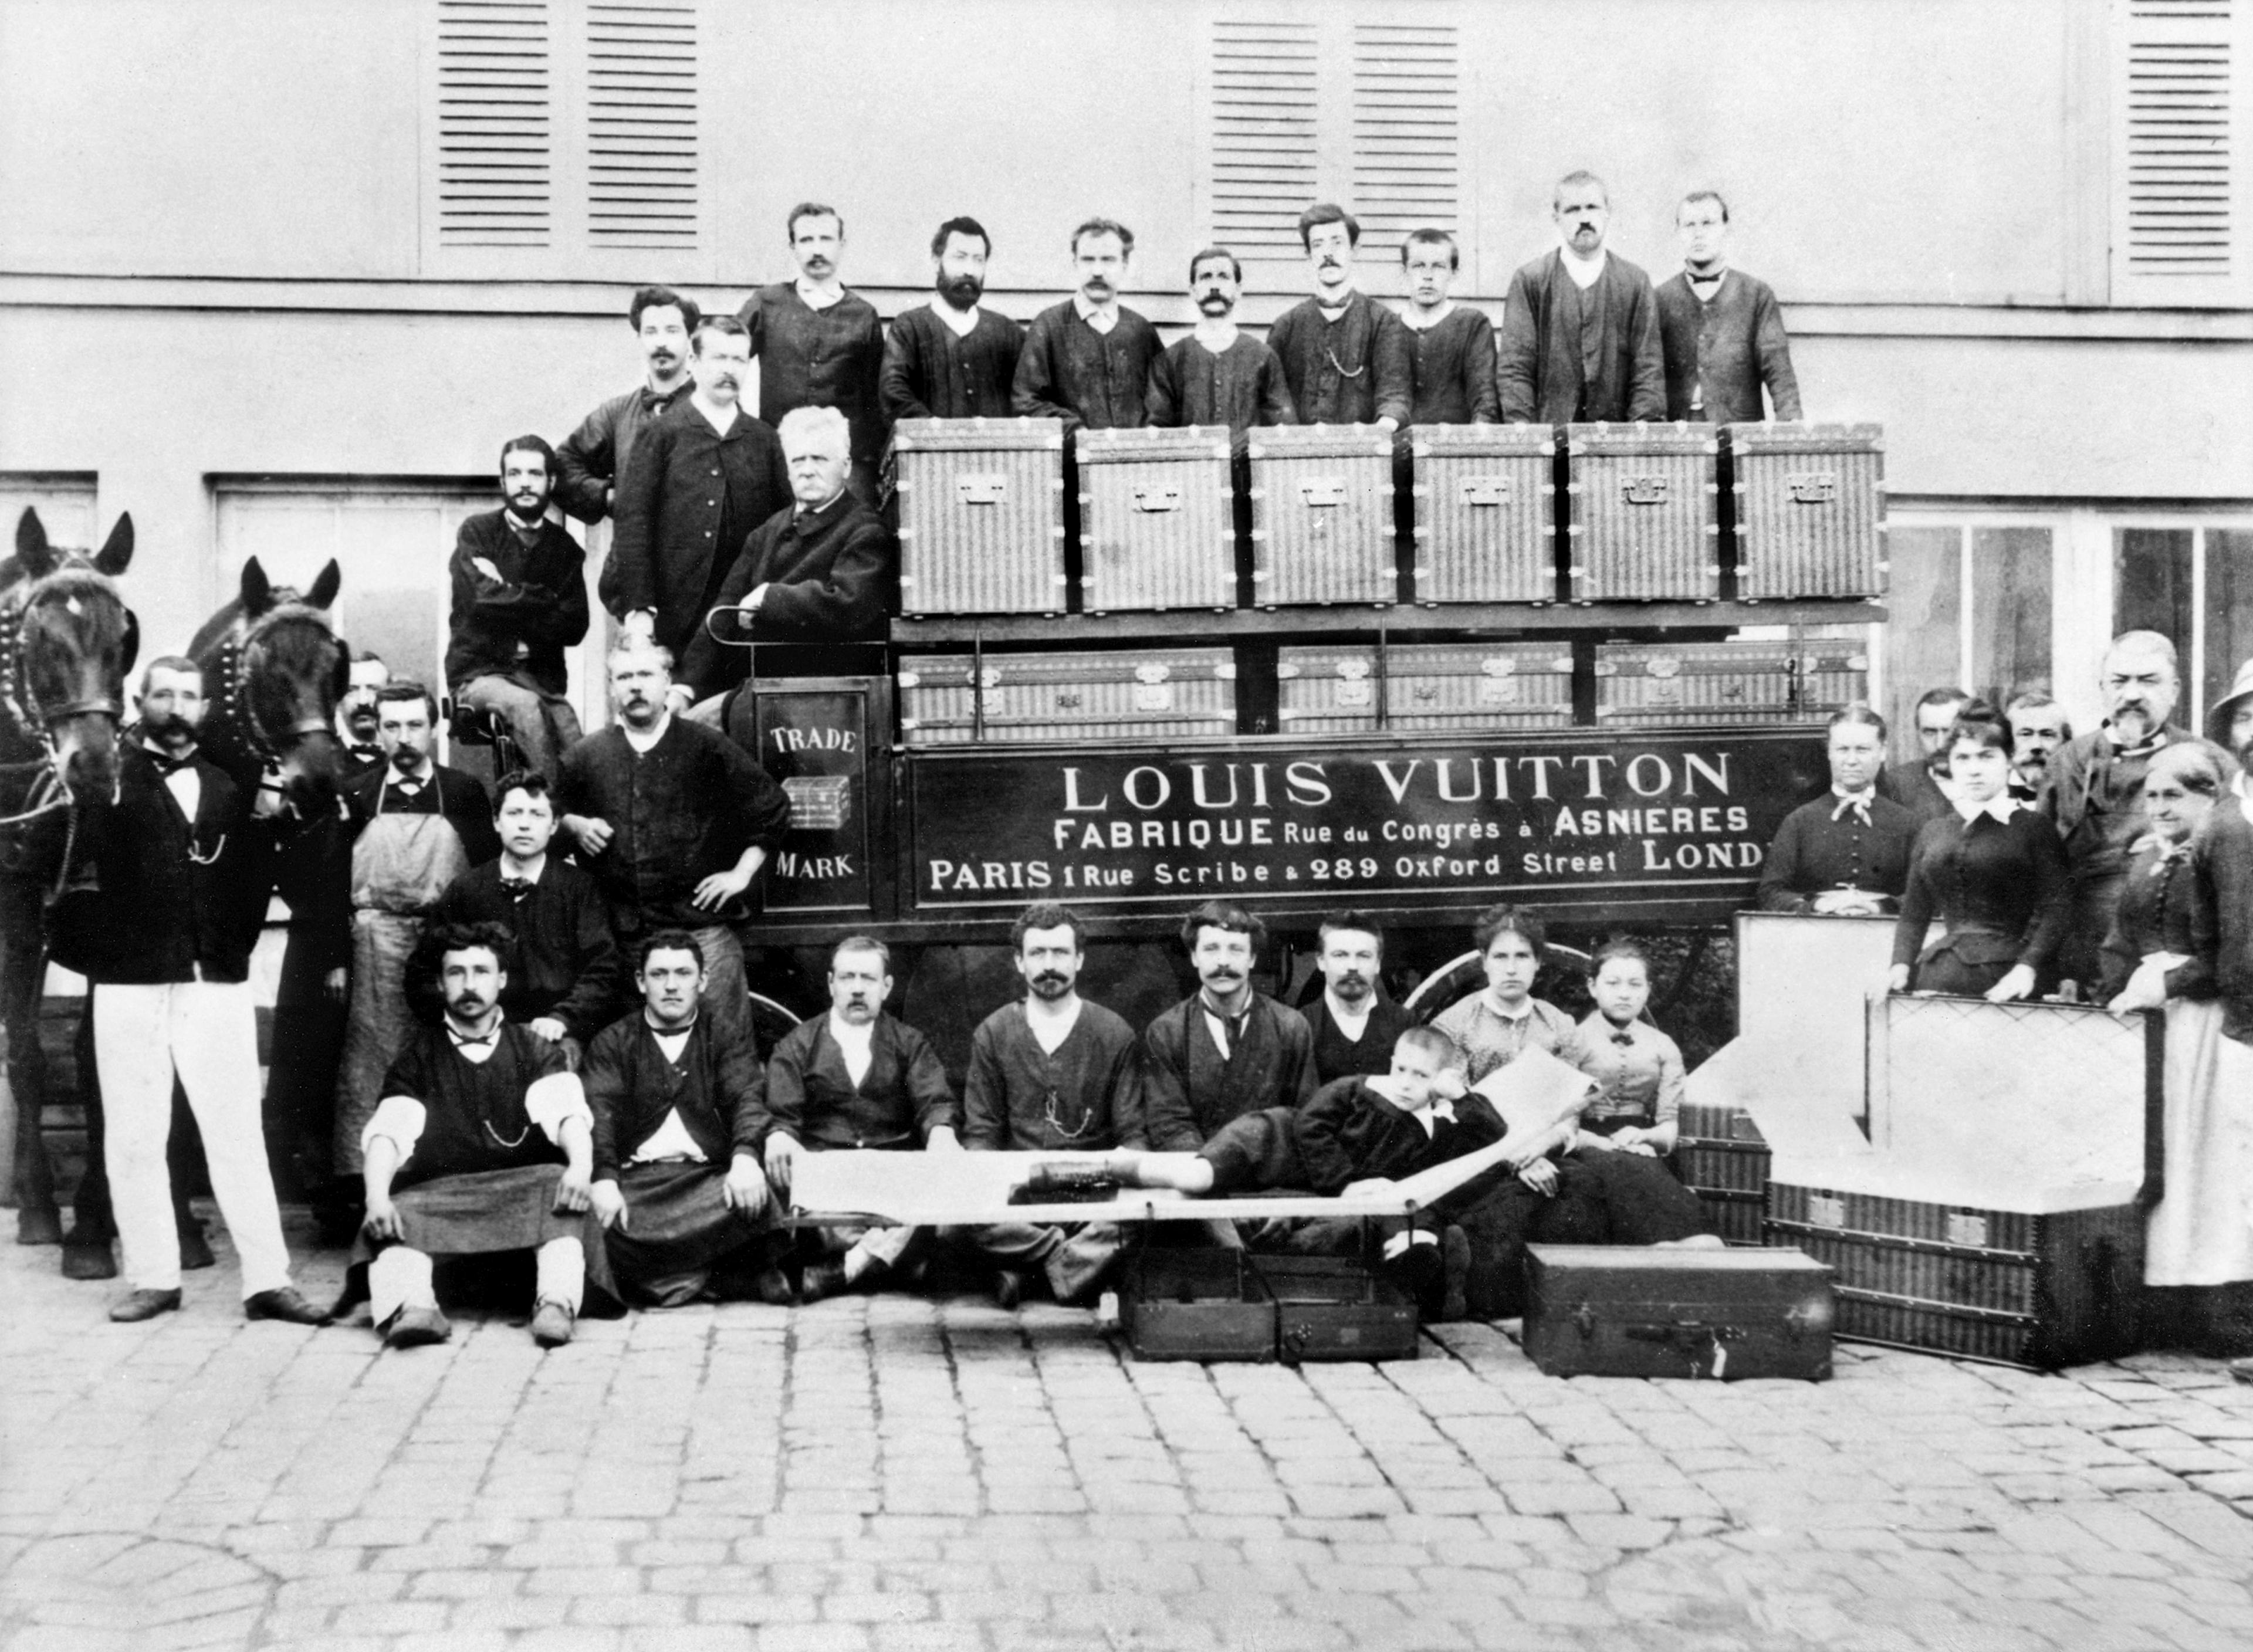 Louis, Georges and Gaston-Louis Vuitton (lying down on a trunk-bed) pose with factory workers in front of a horse-drawn delivery van. Asnières, 1888. © Archives Louis Vuitton Malletier